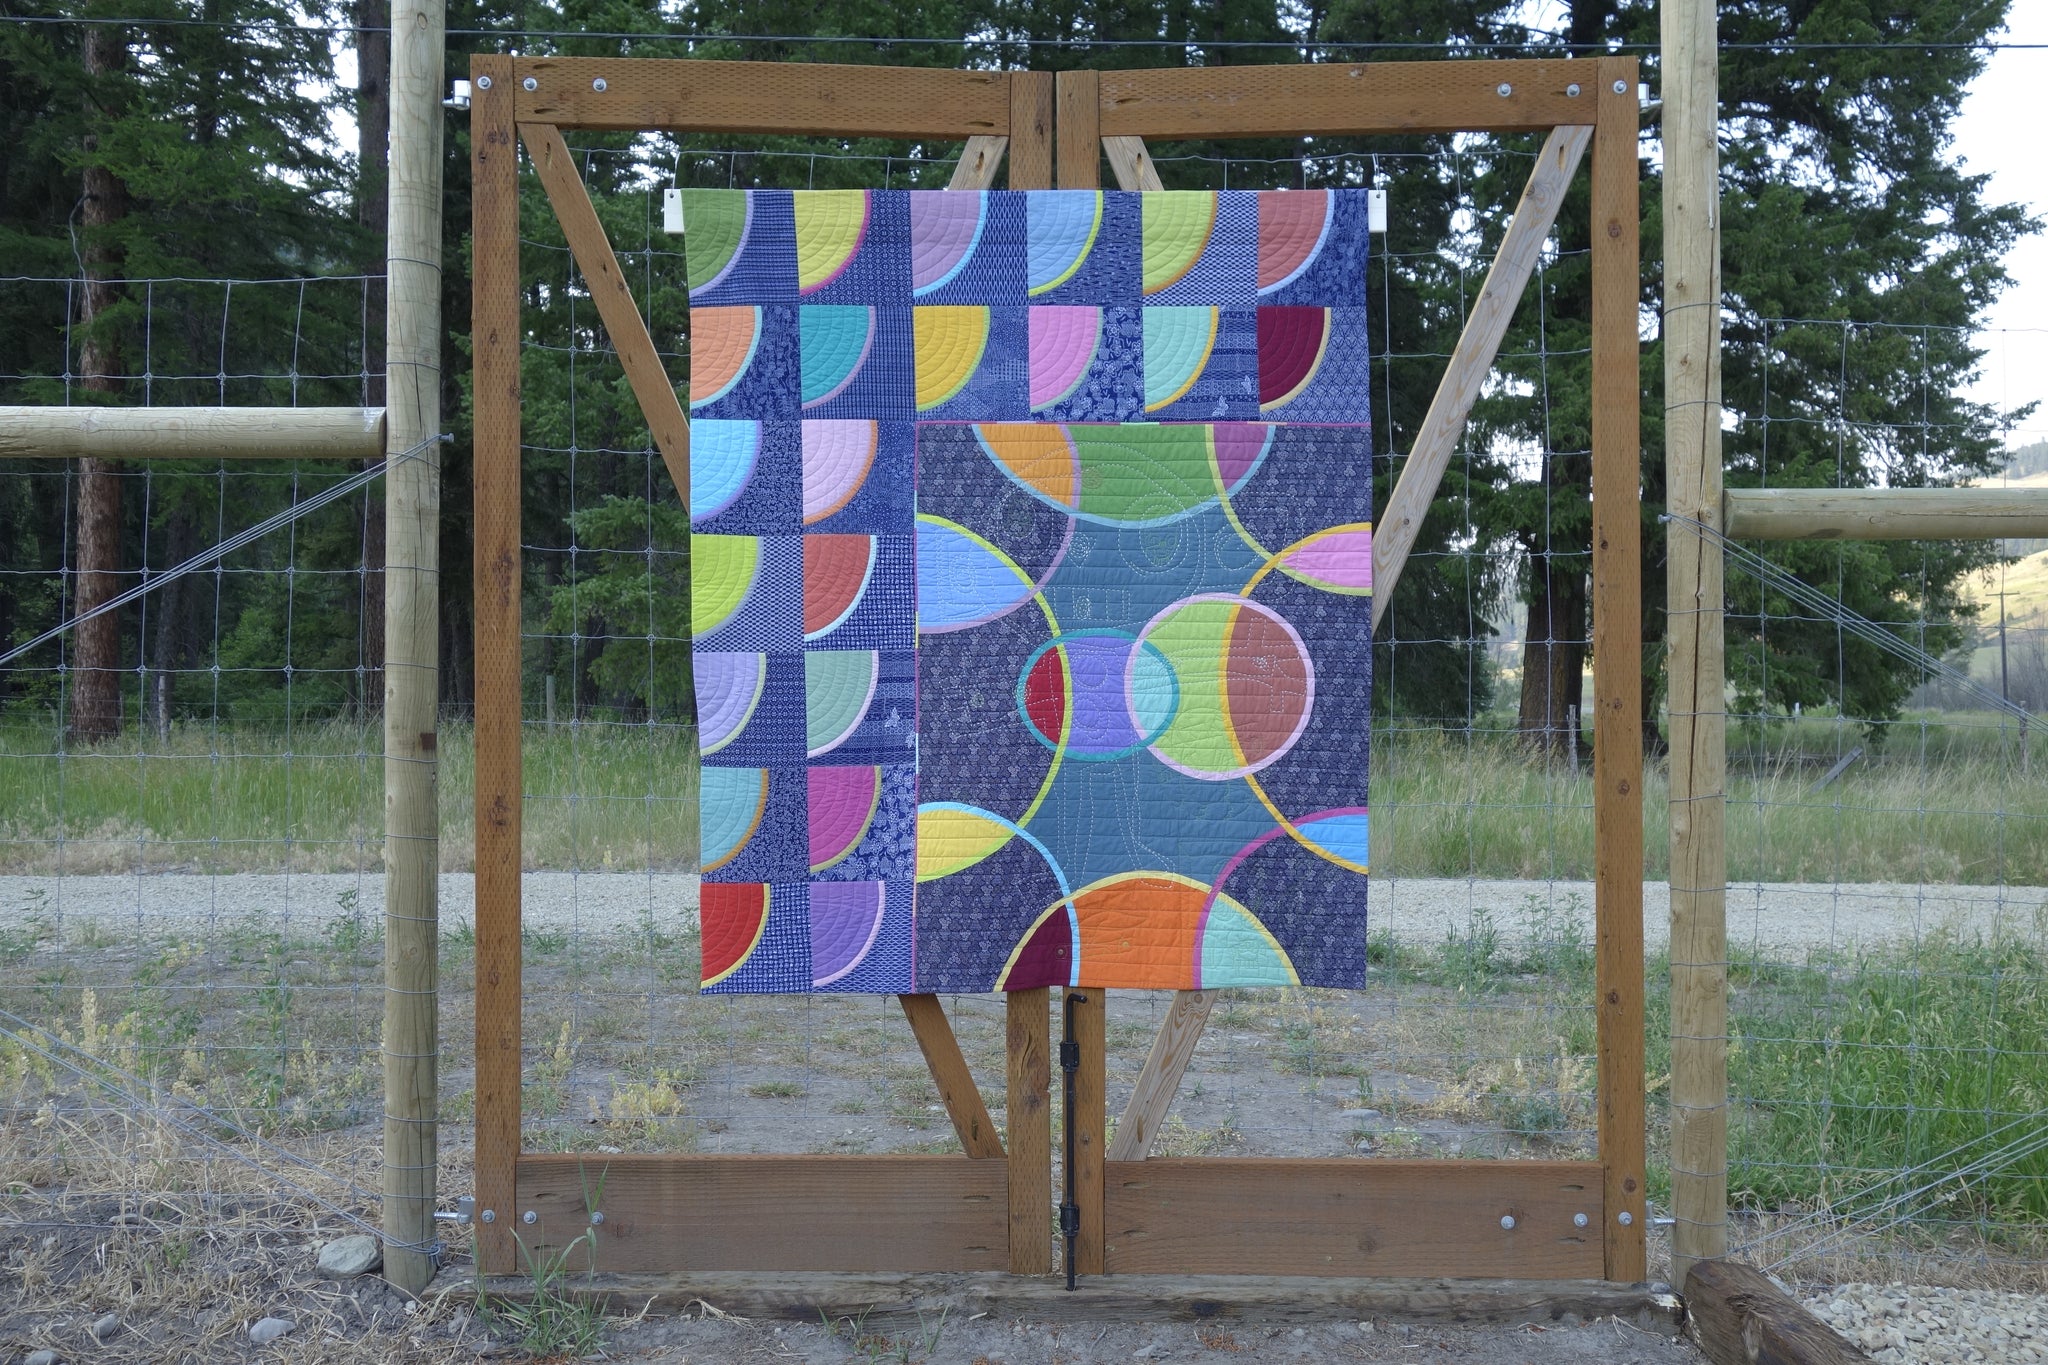 Watermelon From Mars, a quilt by Patricia Belyea